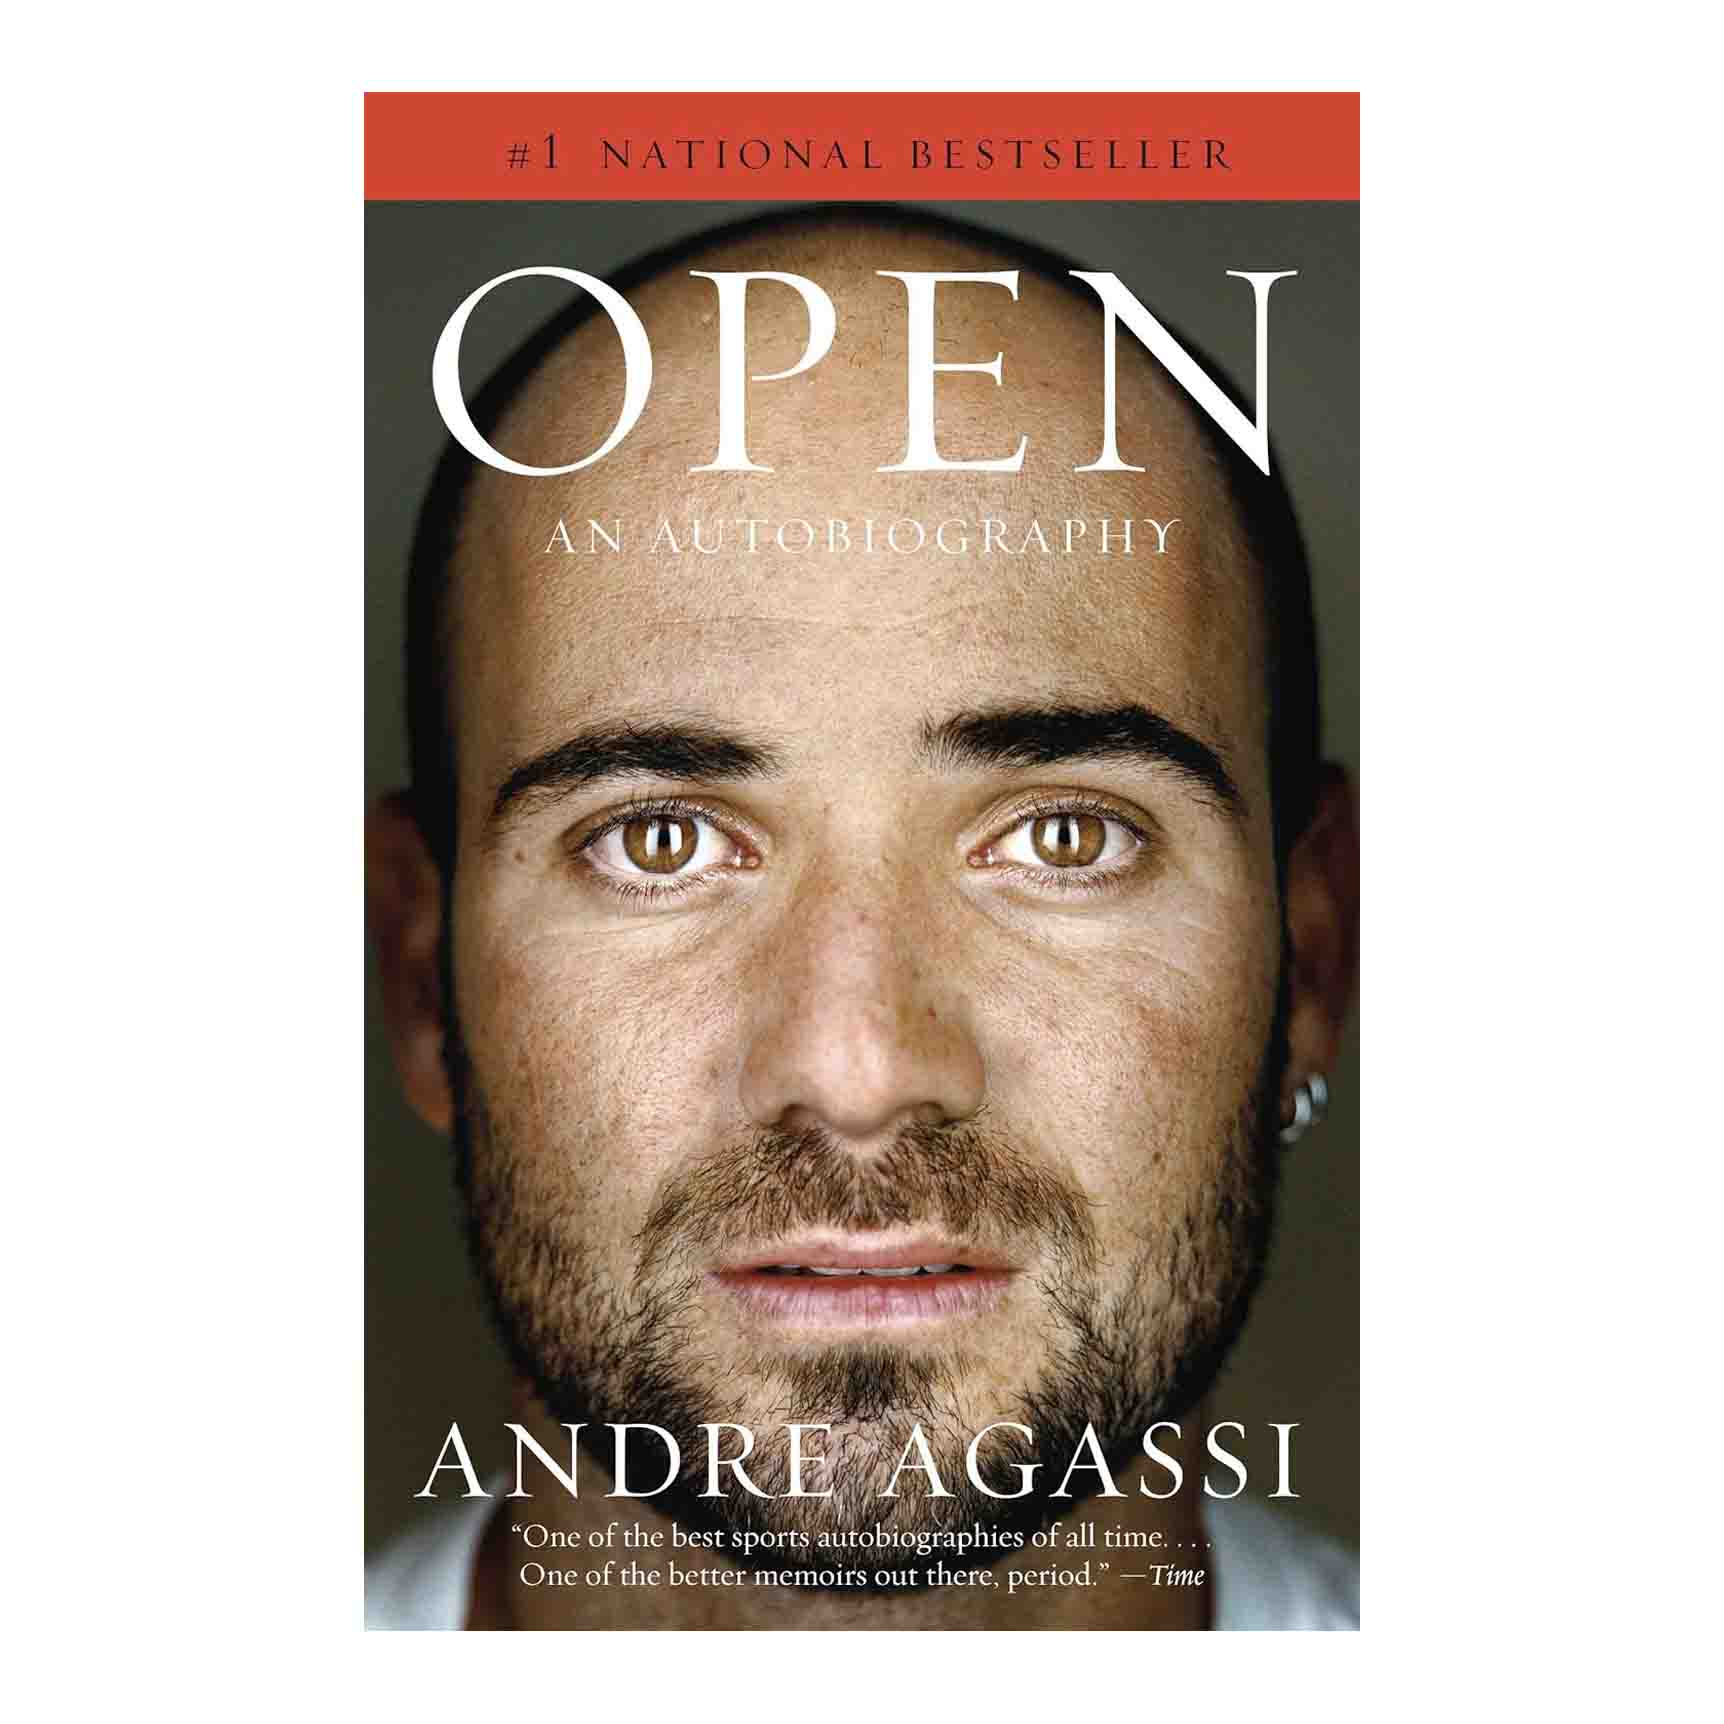 book titled Open with a potrait of Andre Agassi